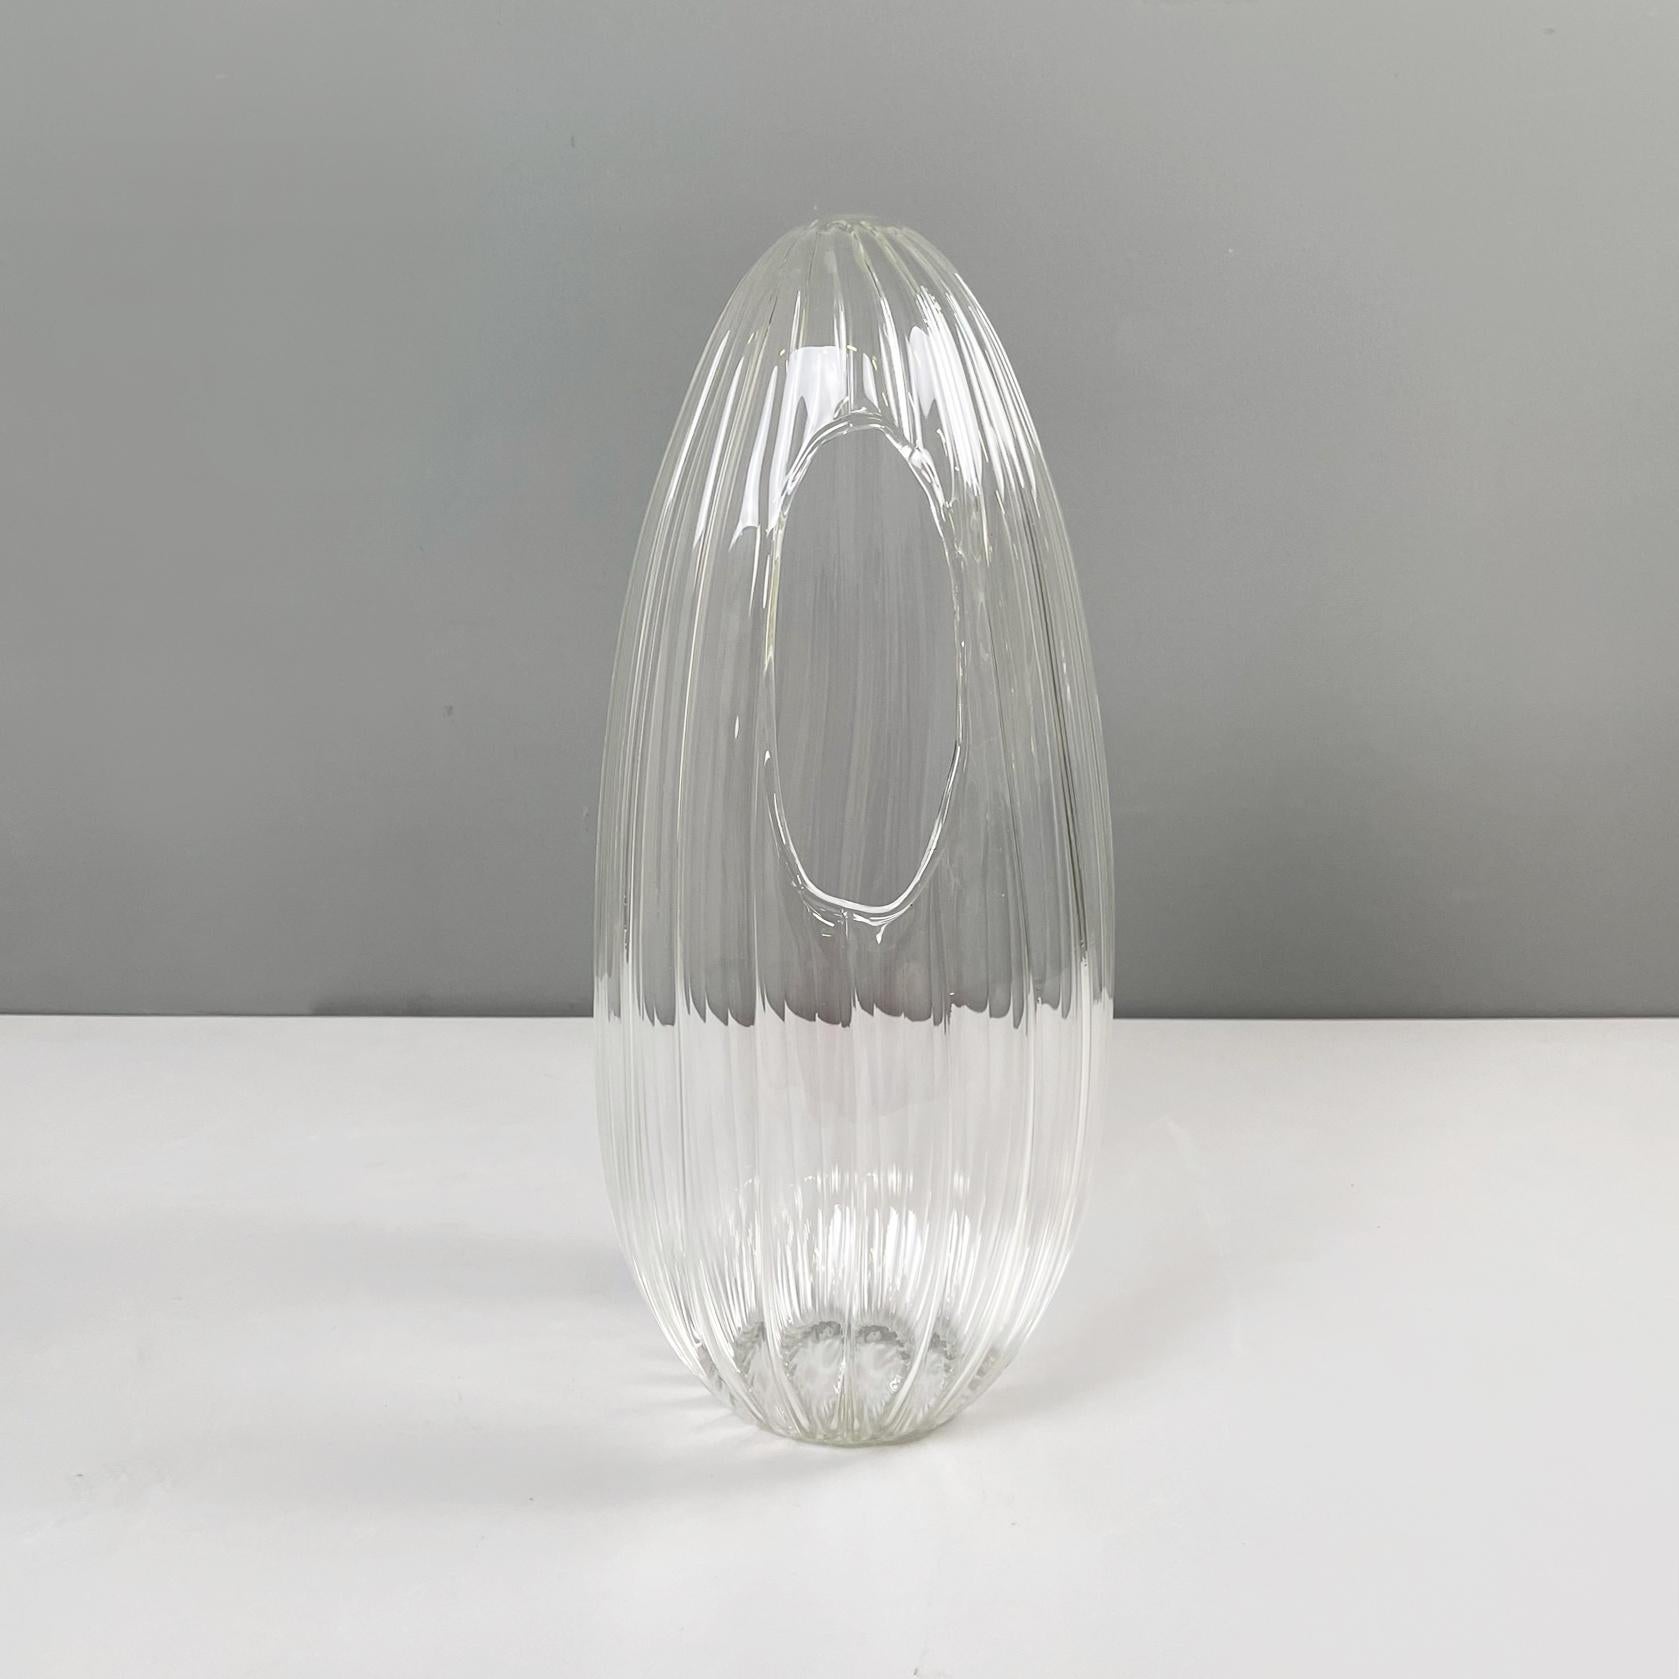 Modern Italian modern Glass vase with round seed shape by Roberto Faccioli, 1990s For Sale